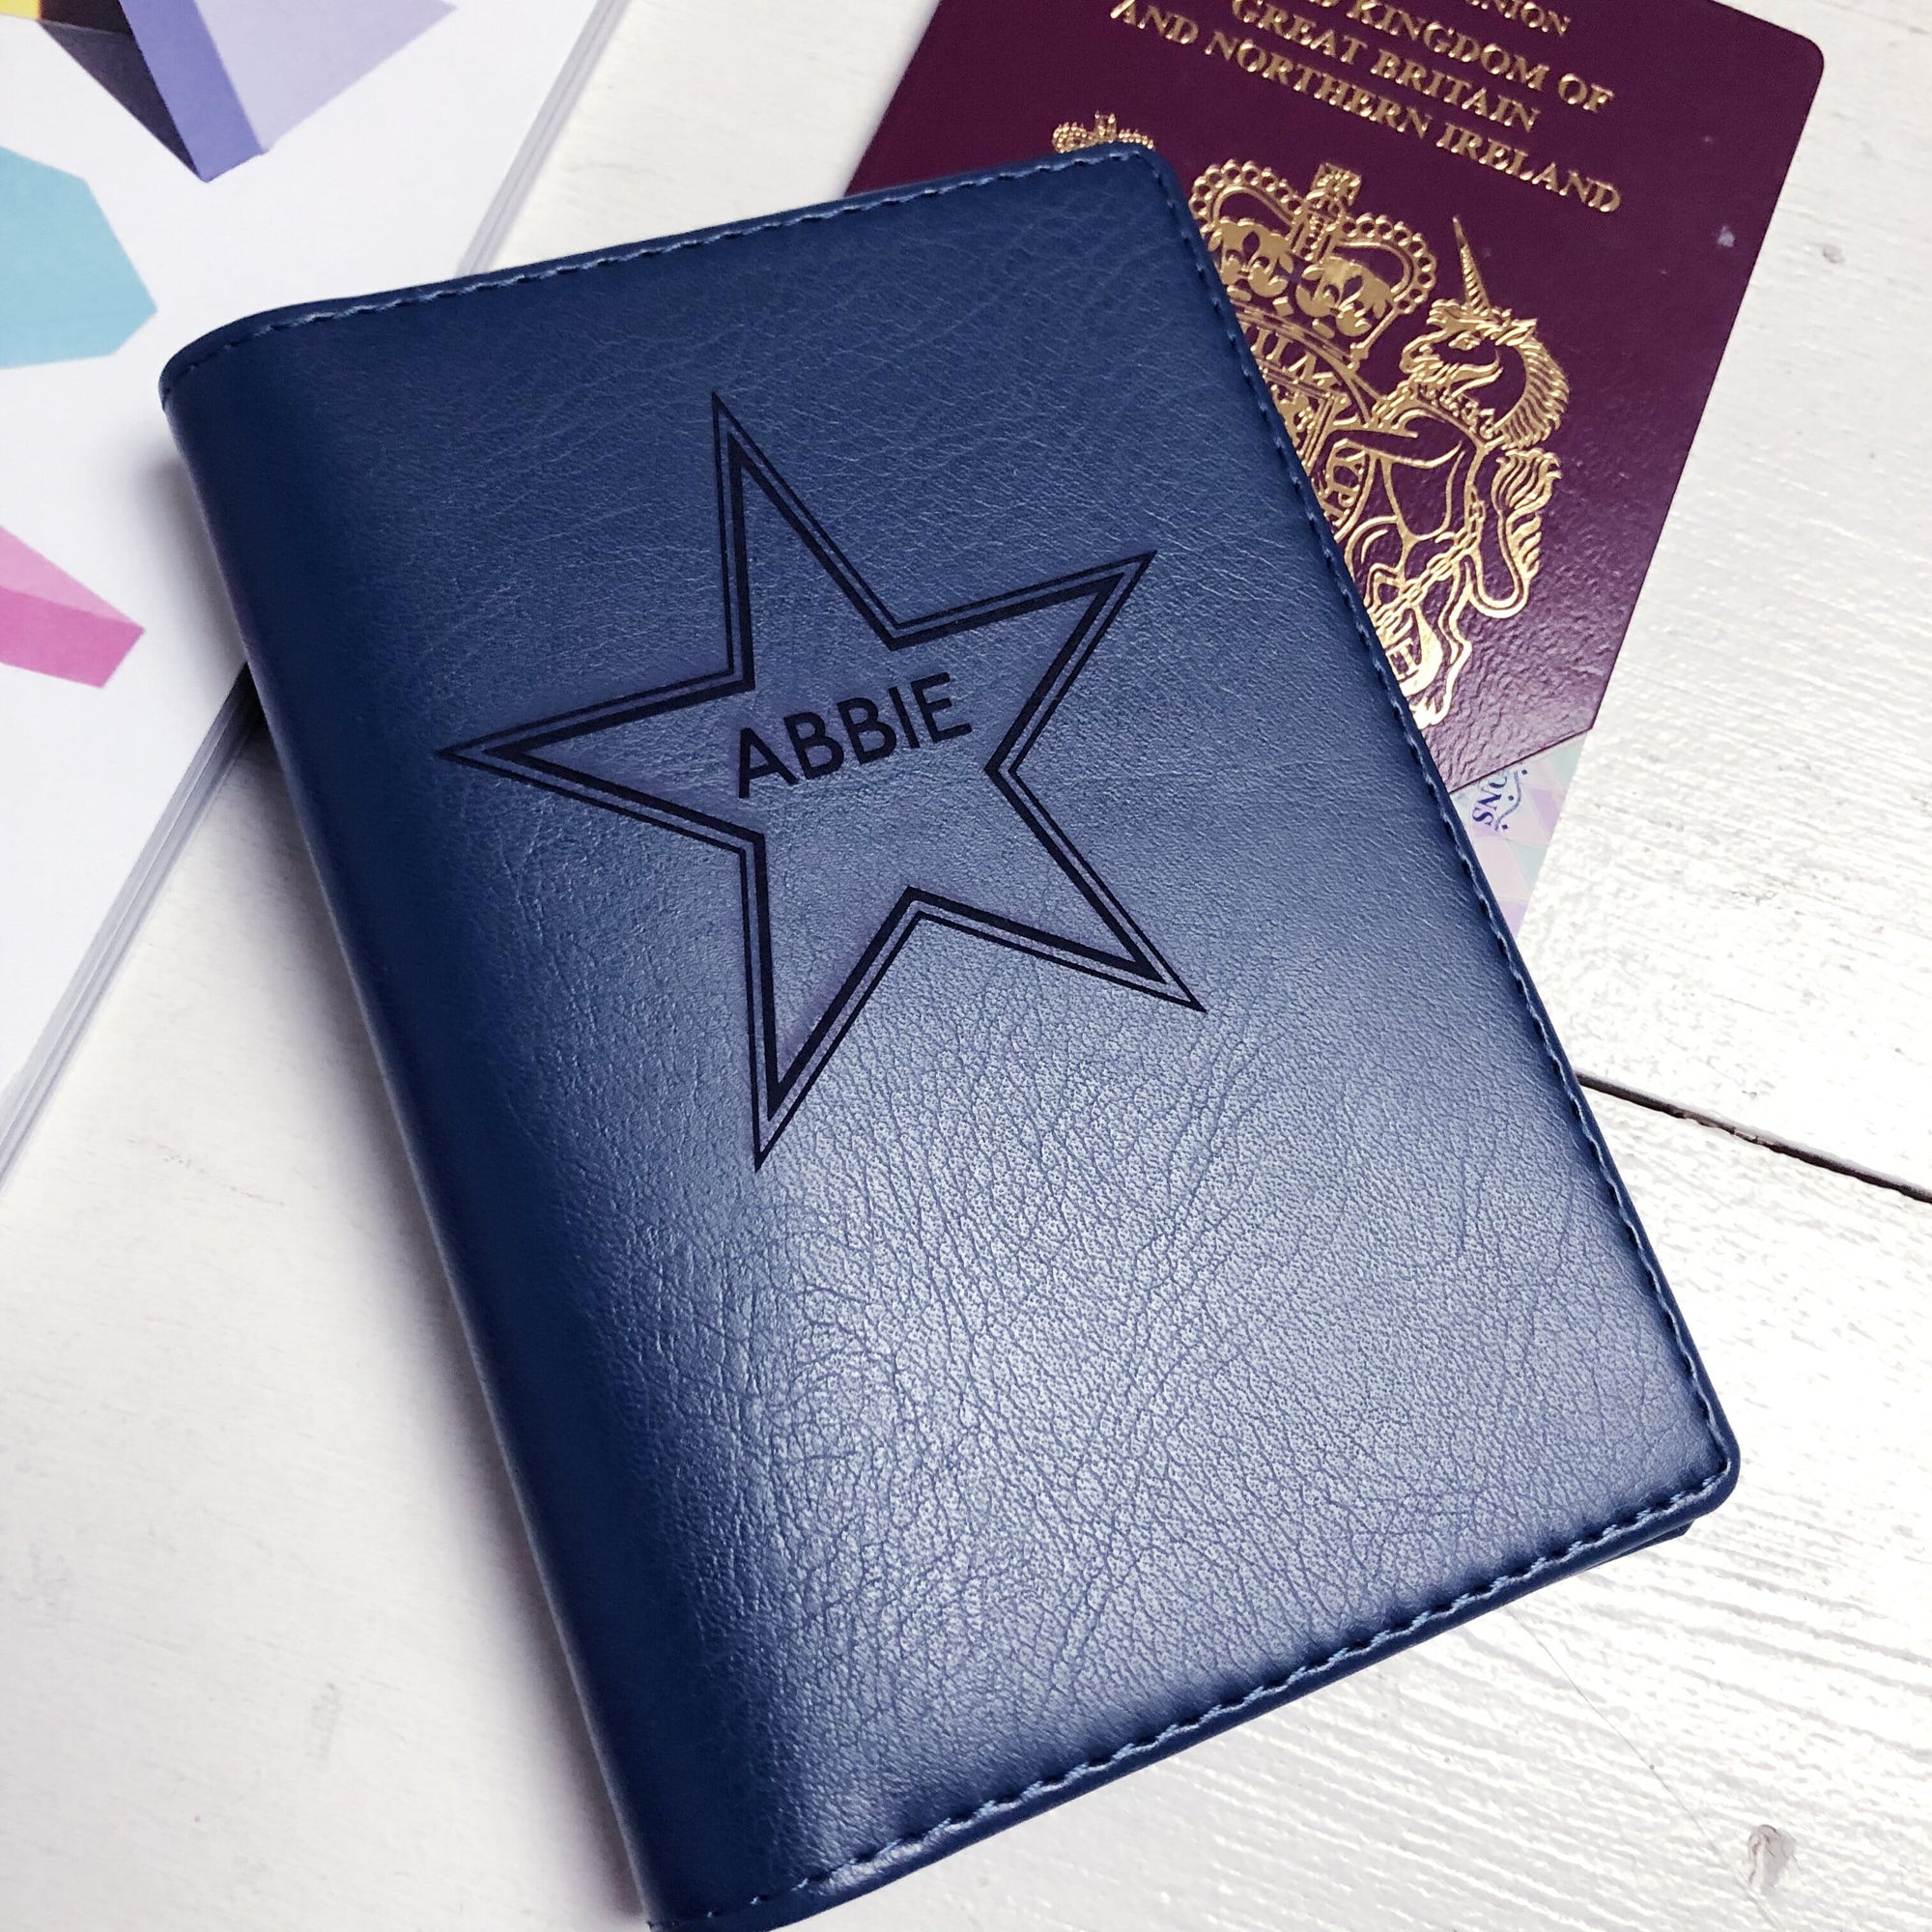 Passport - Personalised Clearance Passport Cover - Abbie-Gift-Betsy Benn